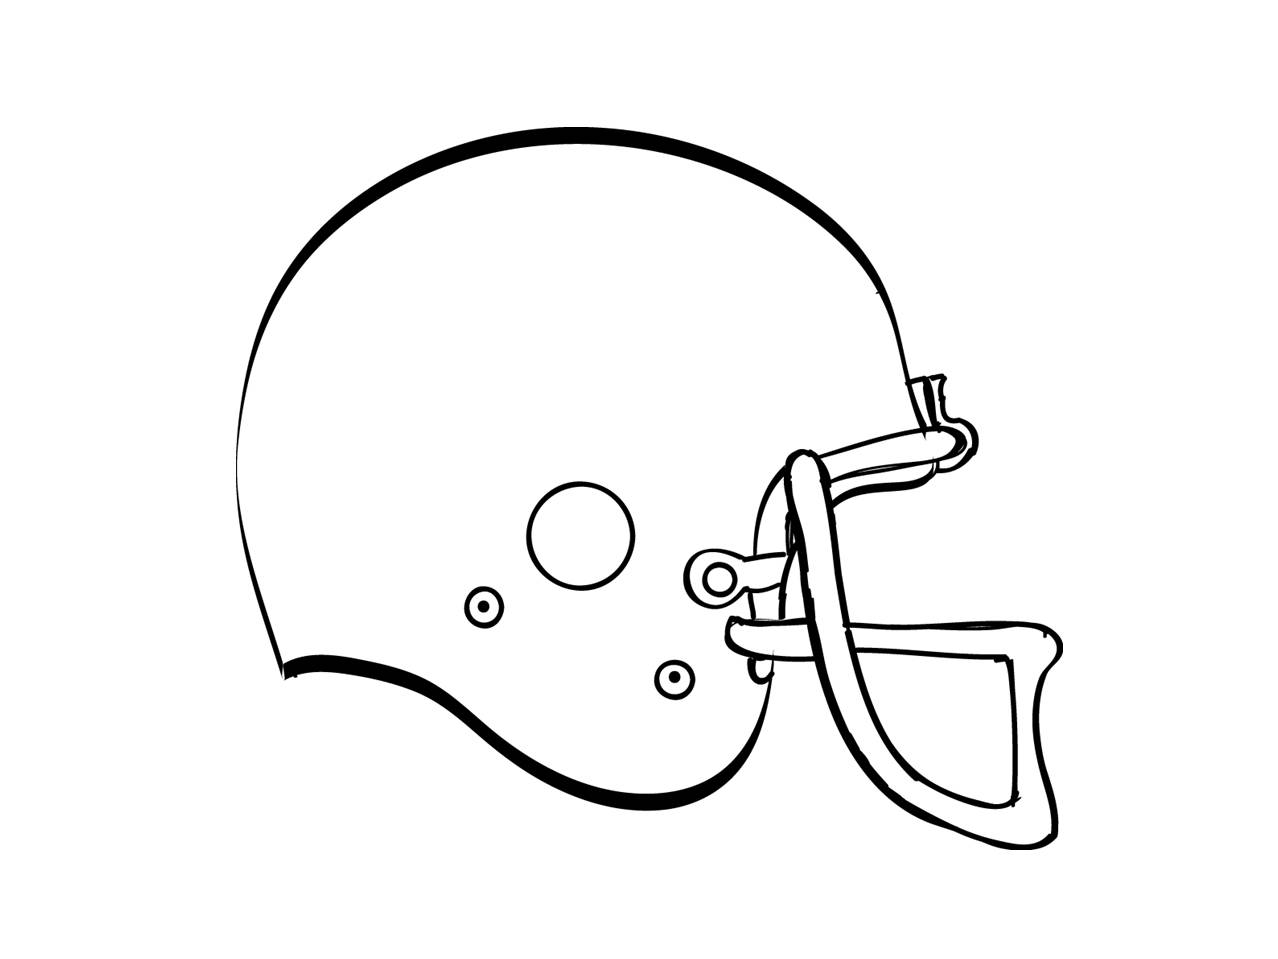 Football Helmet Images Image Download Png Clipart